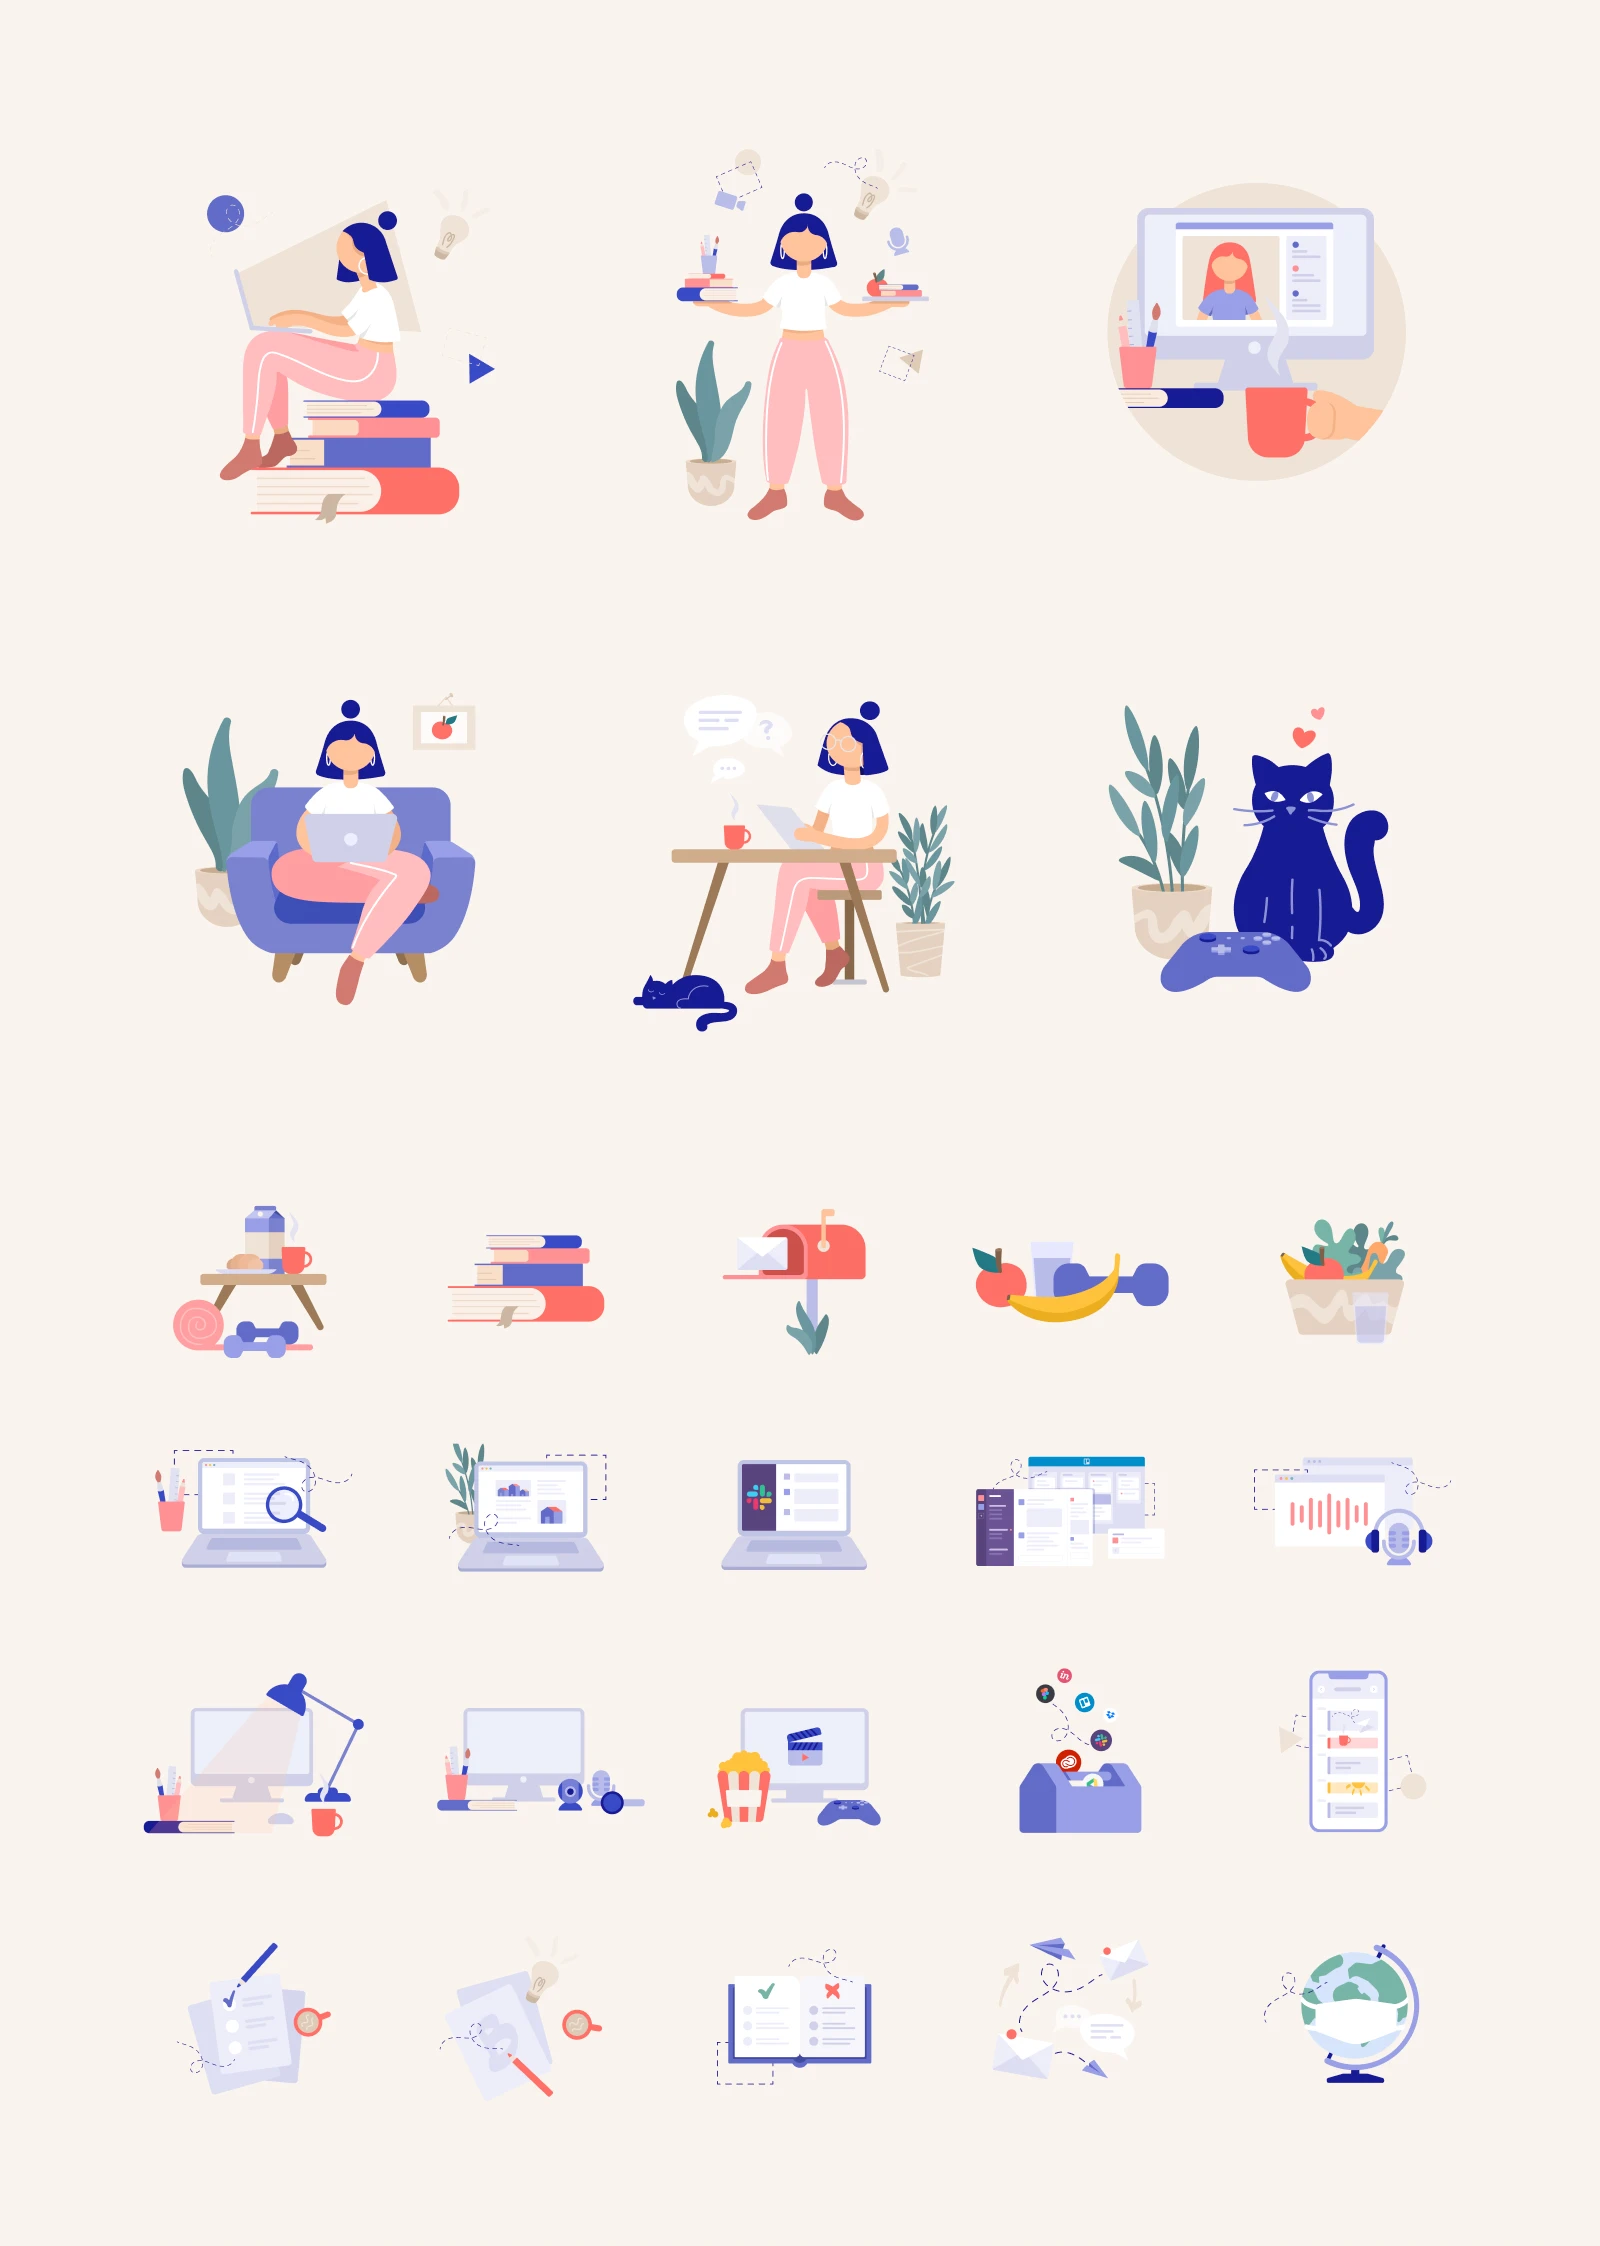 25+ Free Remote Work Illustrations - More than 25 vector illustrations in SVG, PNG, Figma and AI formats.